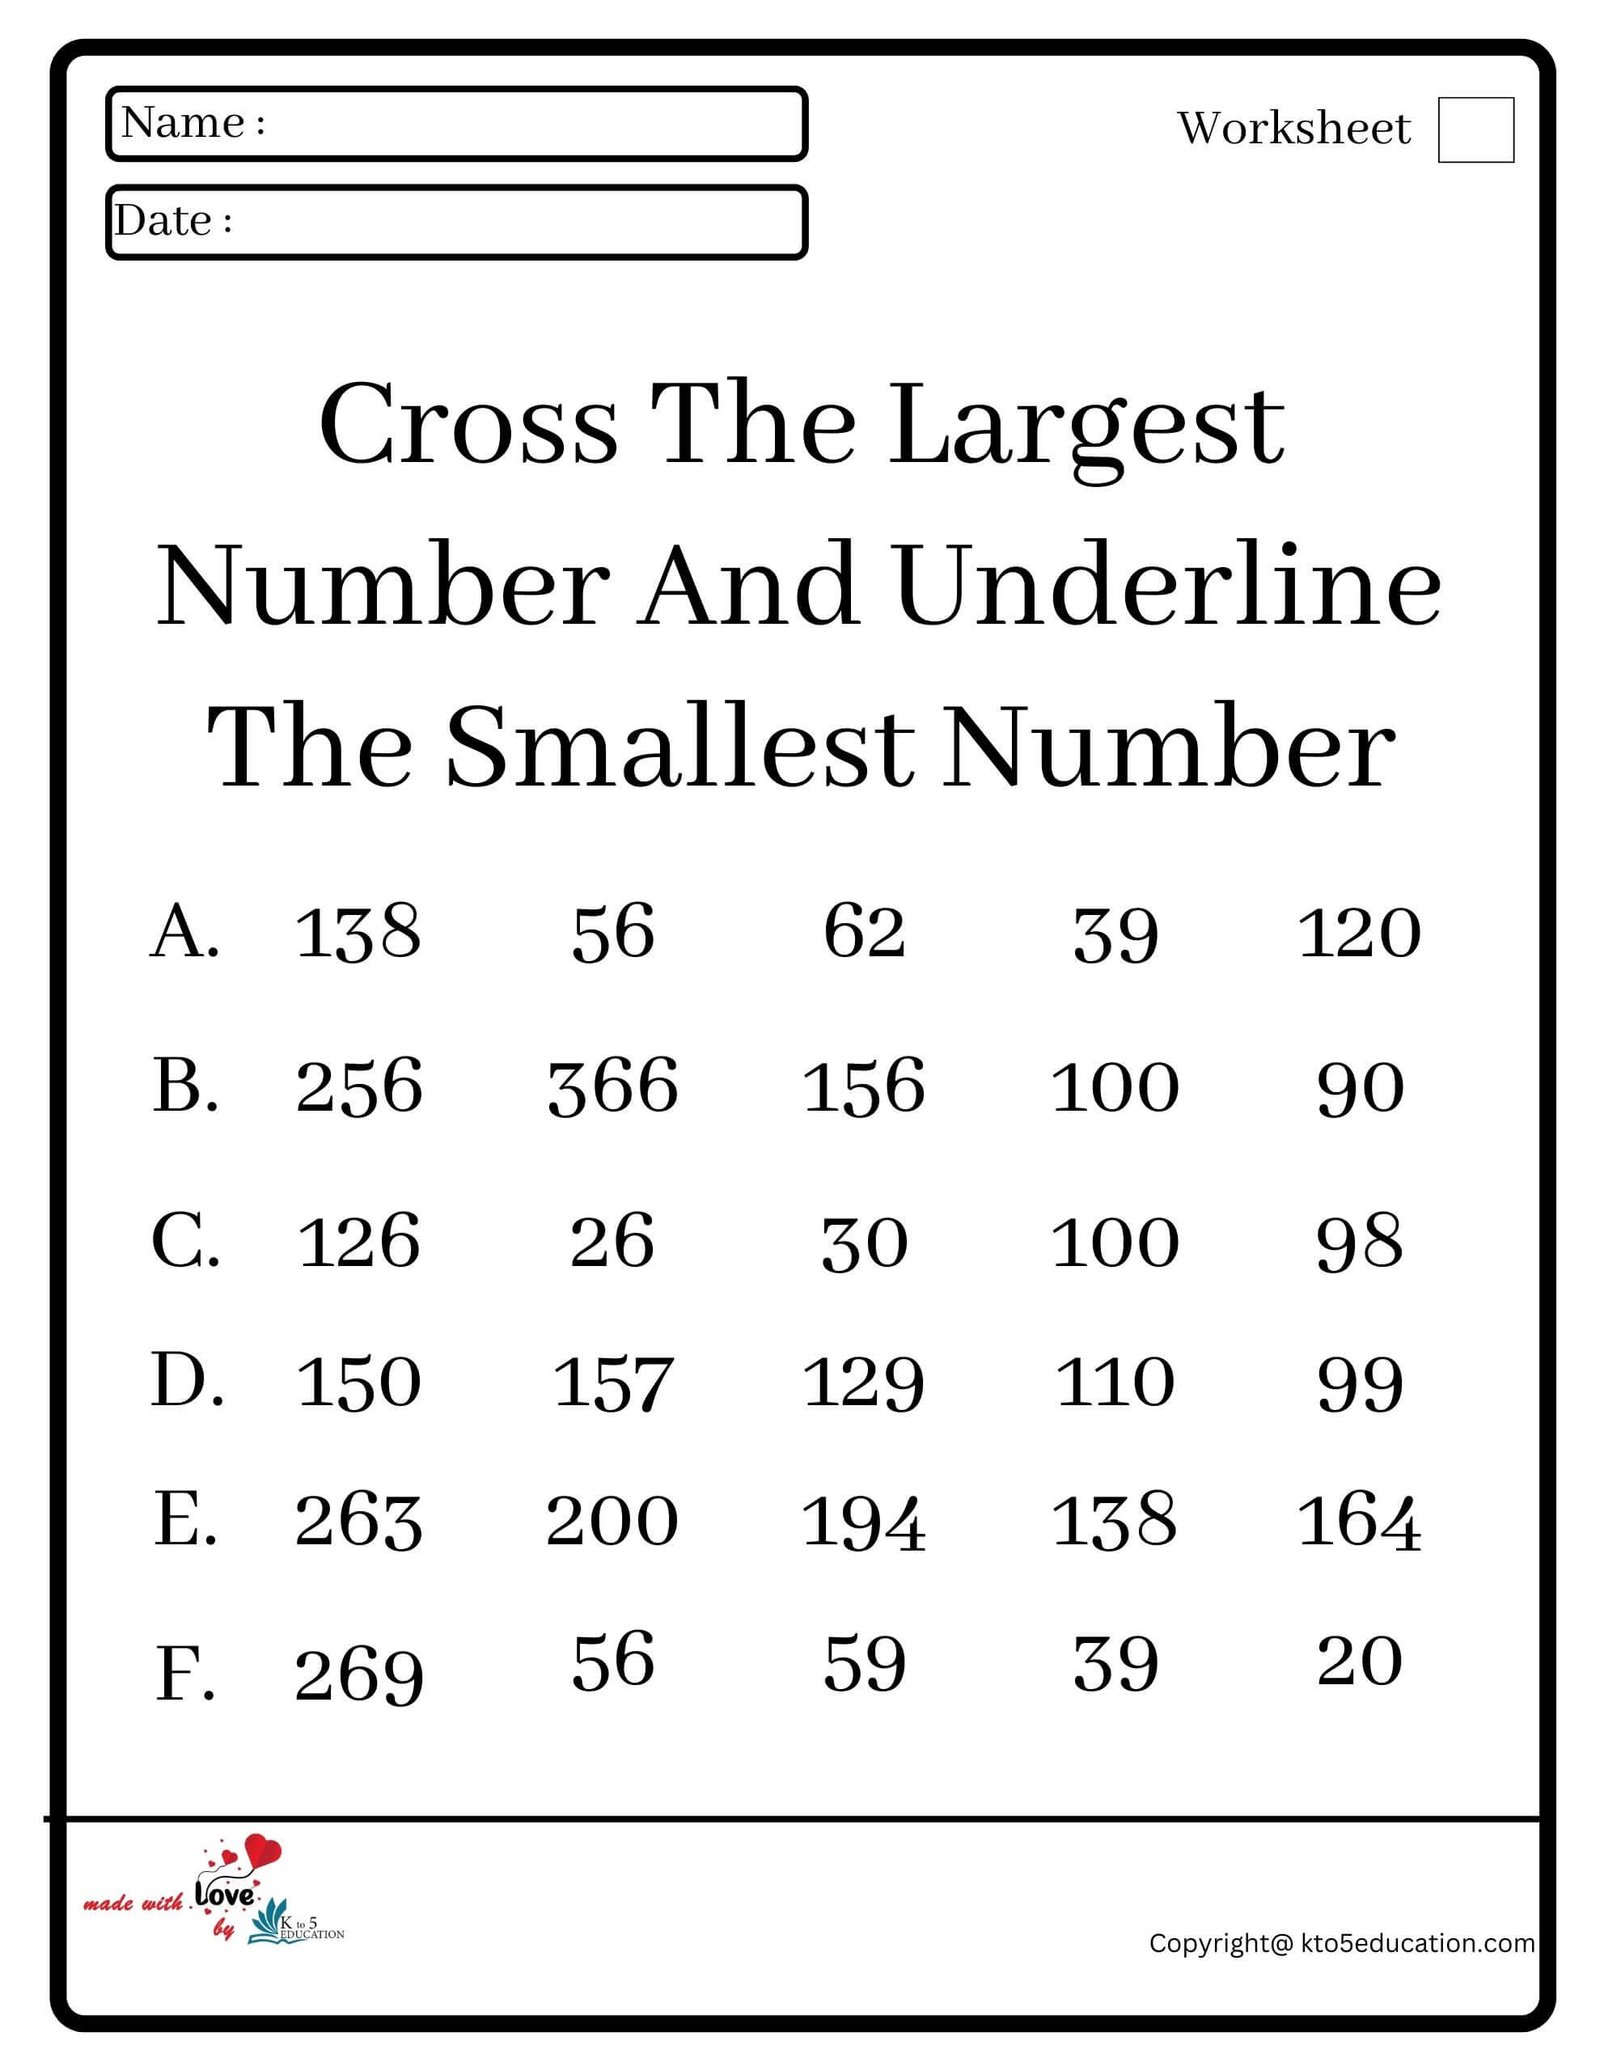 Cross The Largest Number And Underline The Smallest Number Worksheet